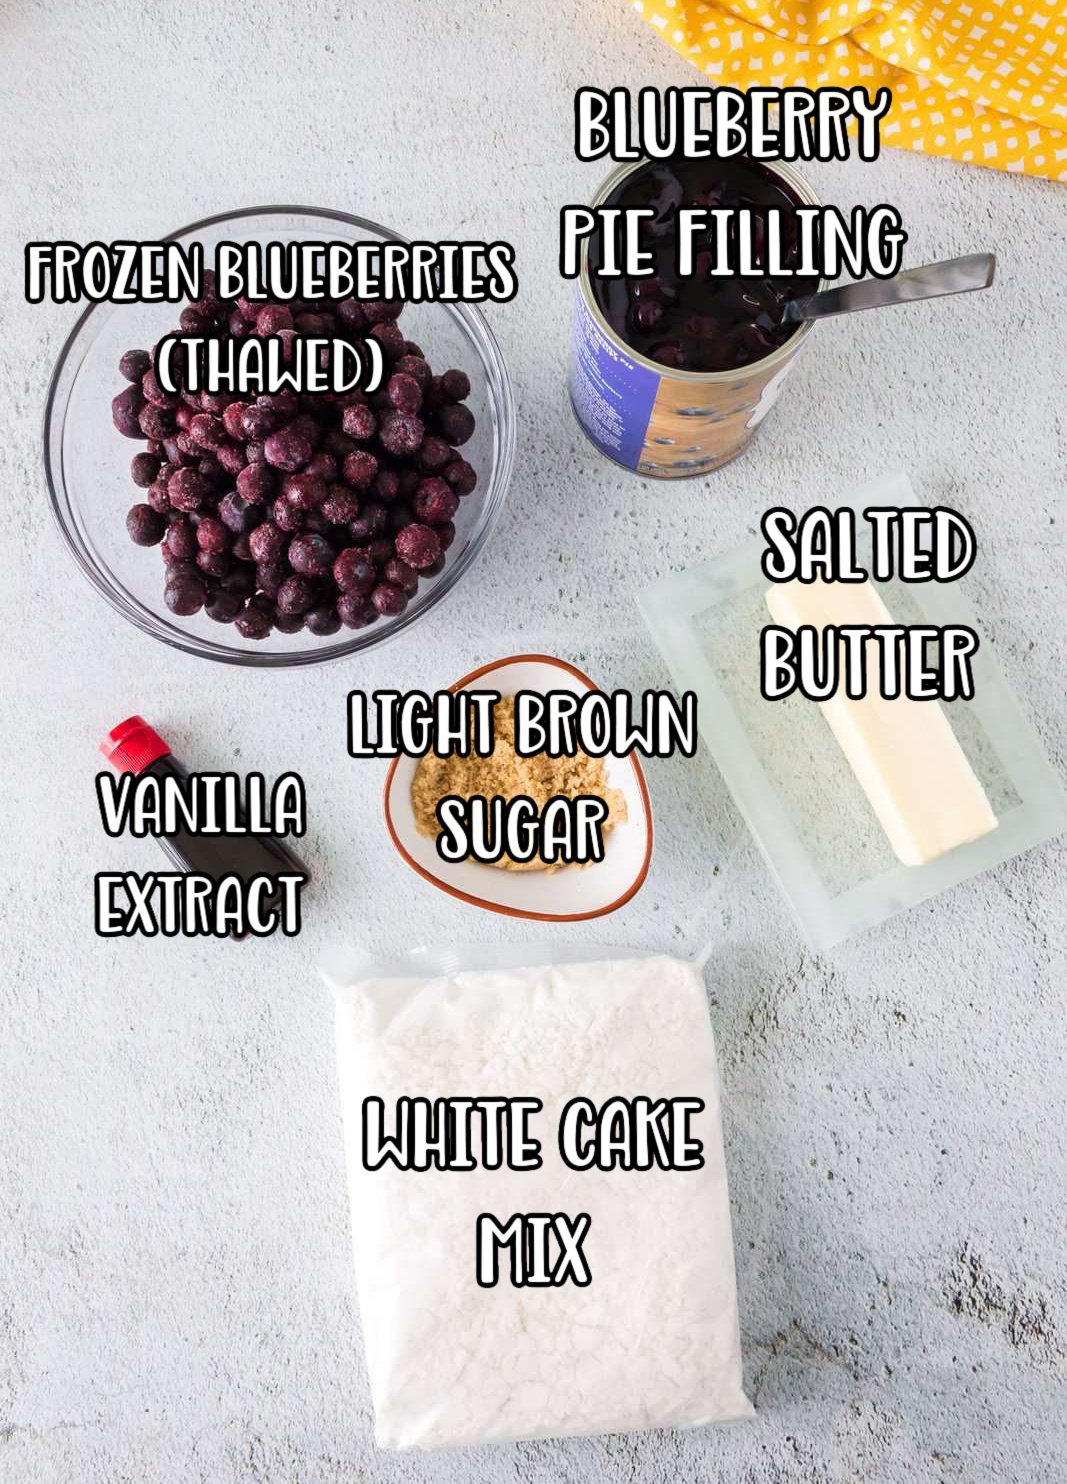 Blueberry pie filling, blueberries, brown sugar, white cake mix, vanilla extract, and salted butter. 